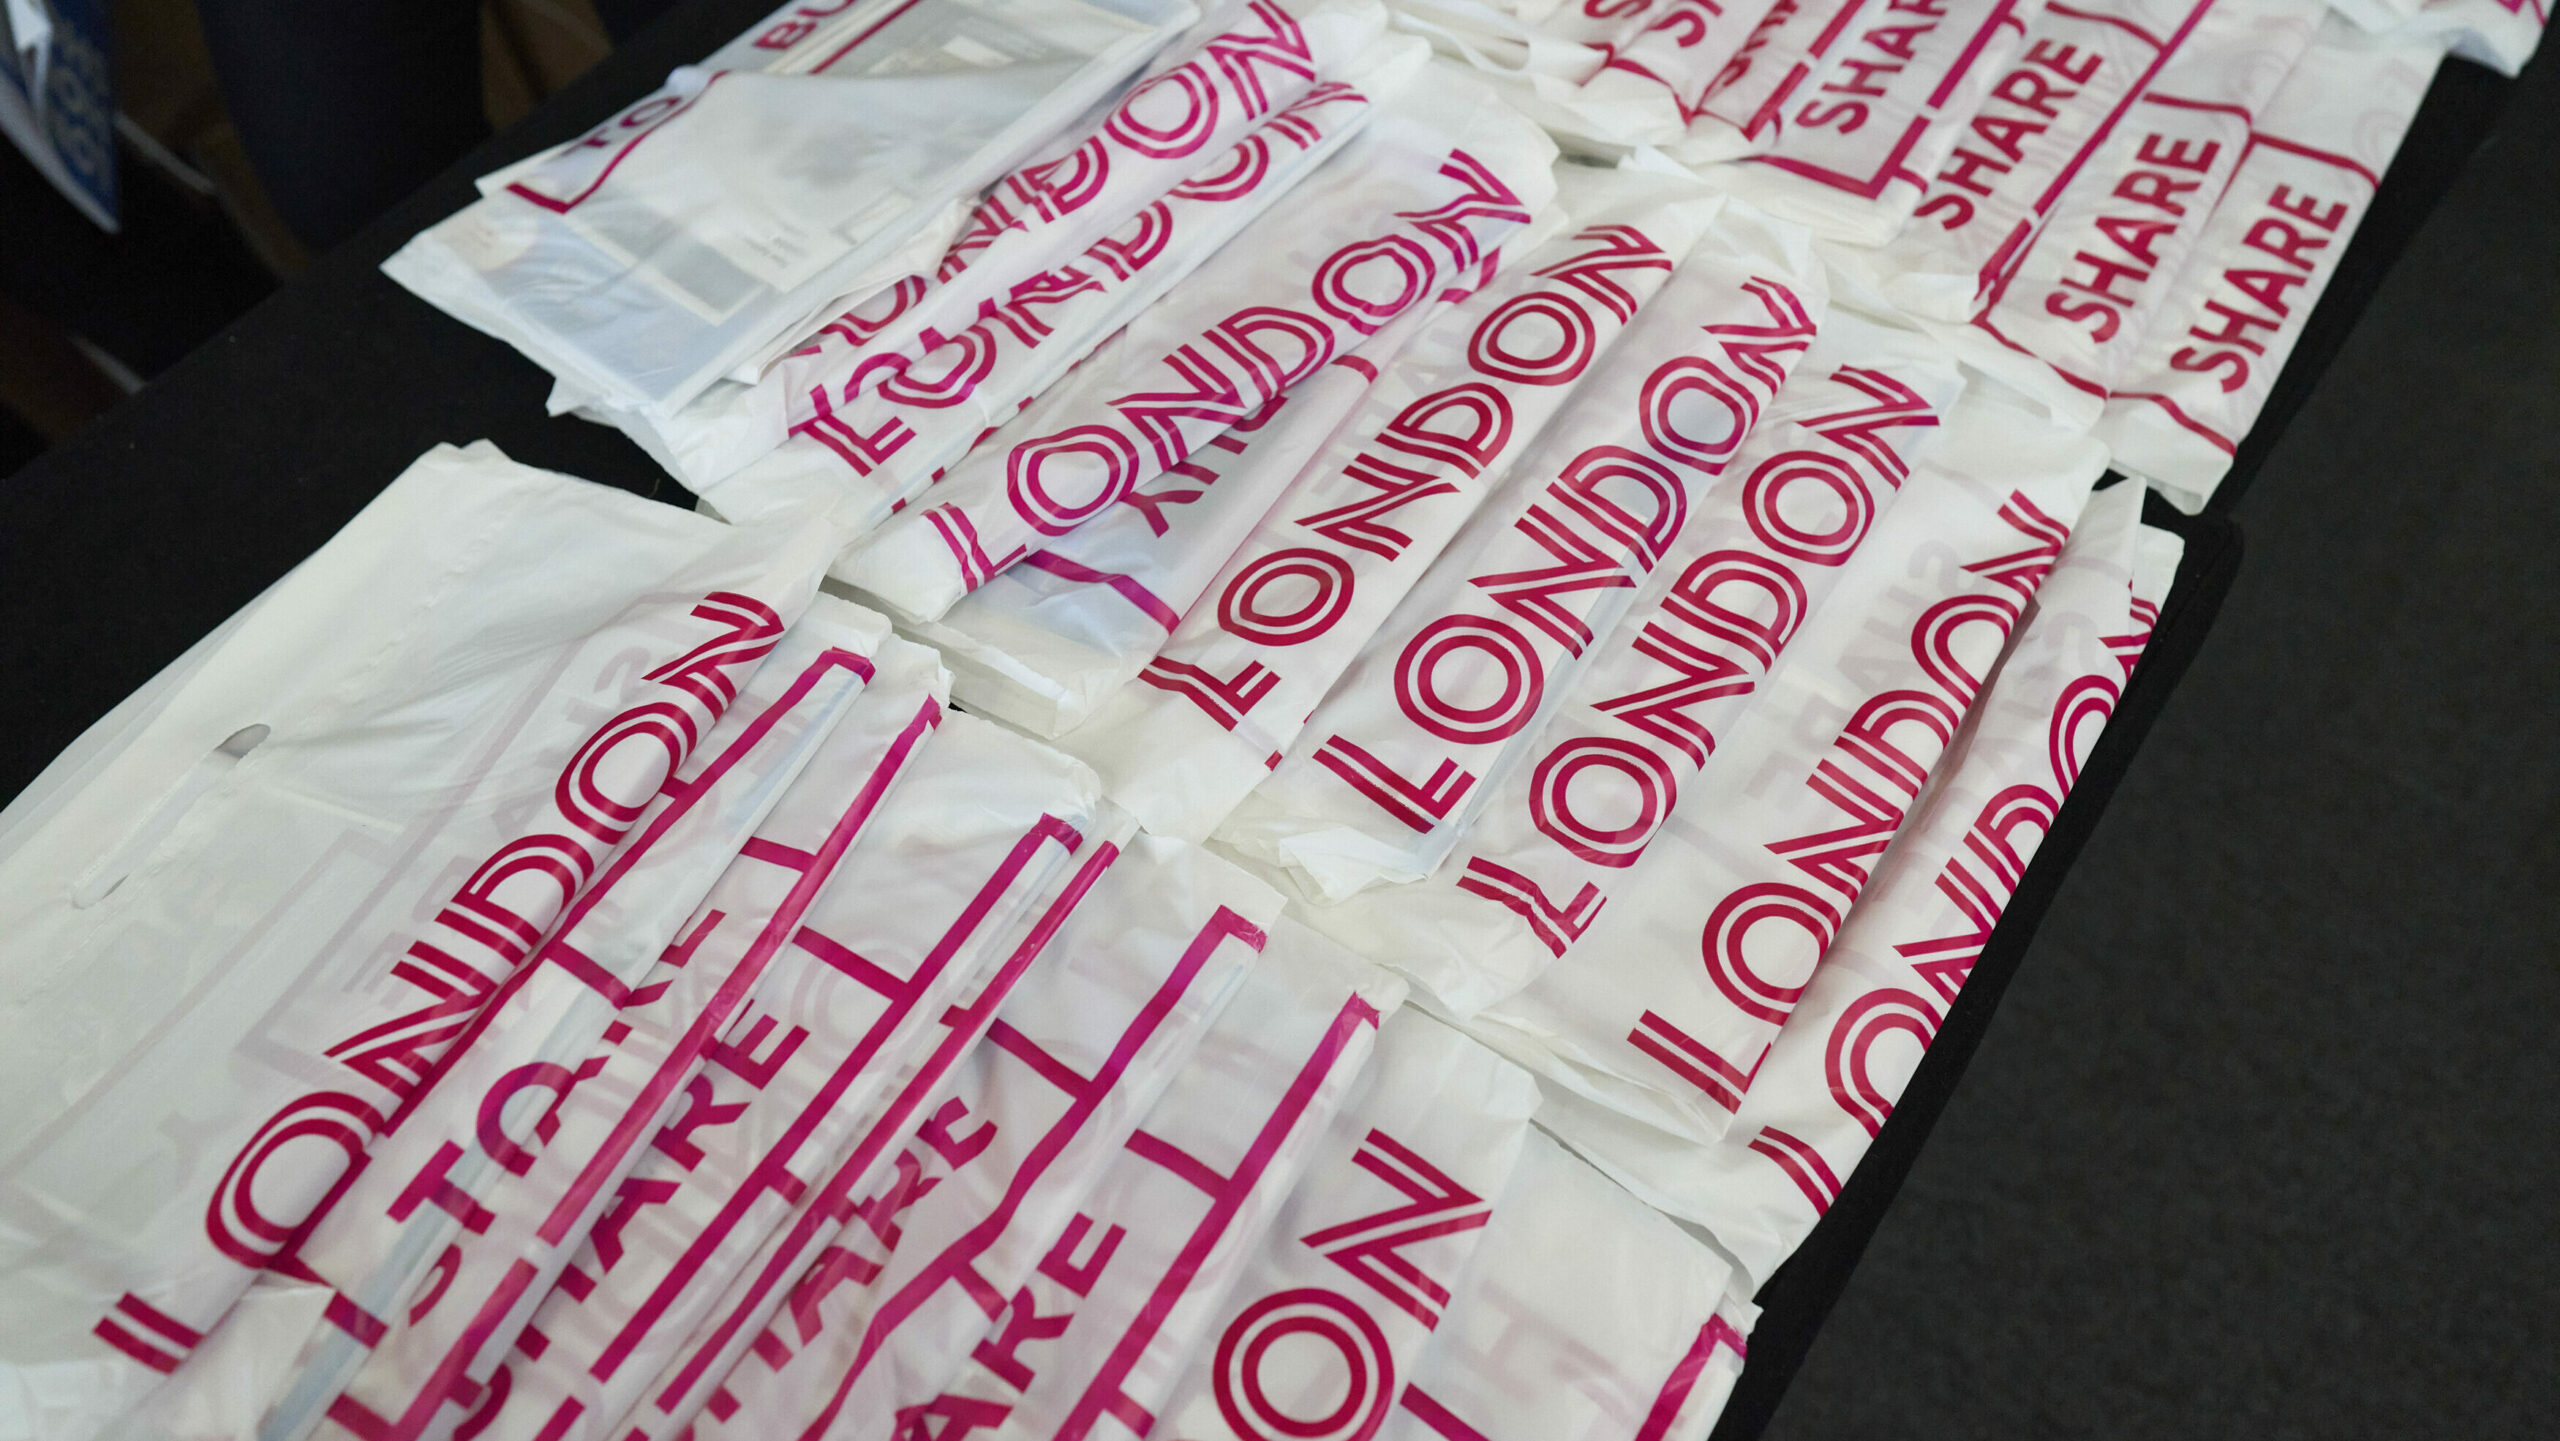 An image of London Home Show branded bags 